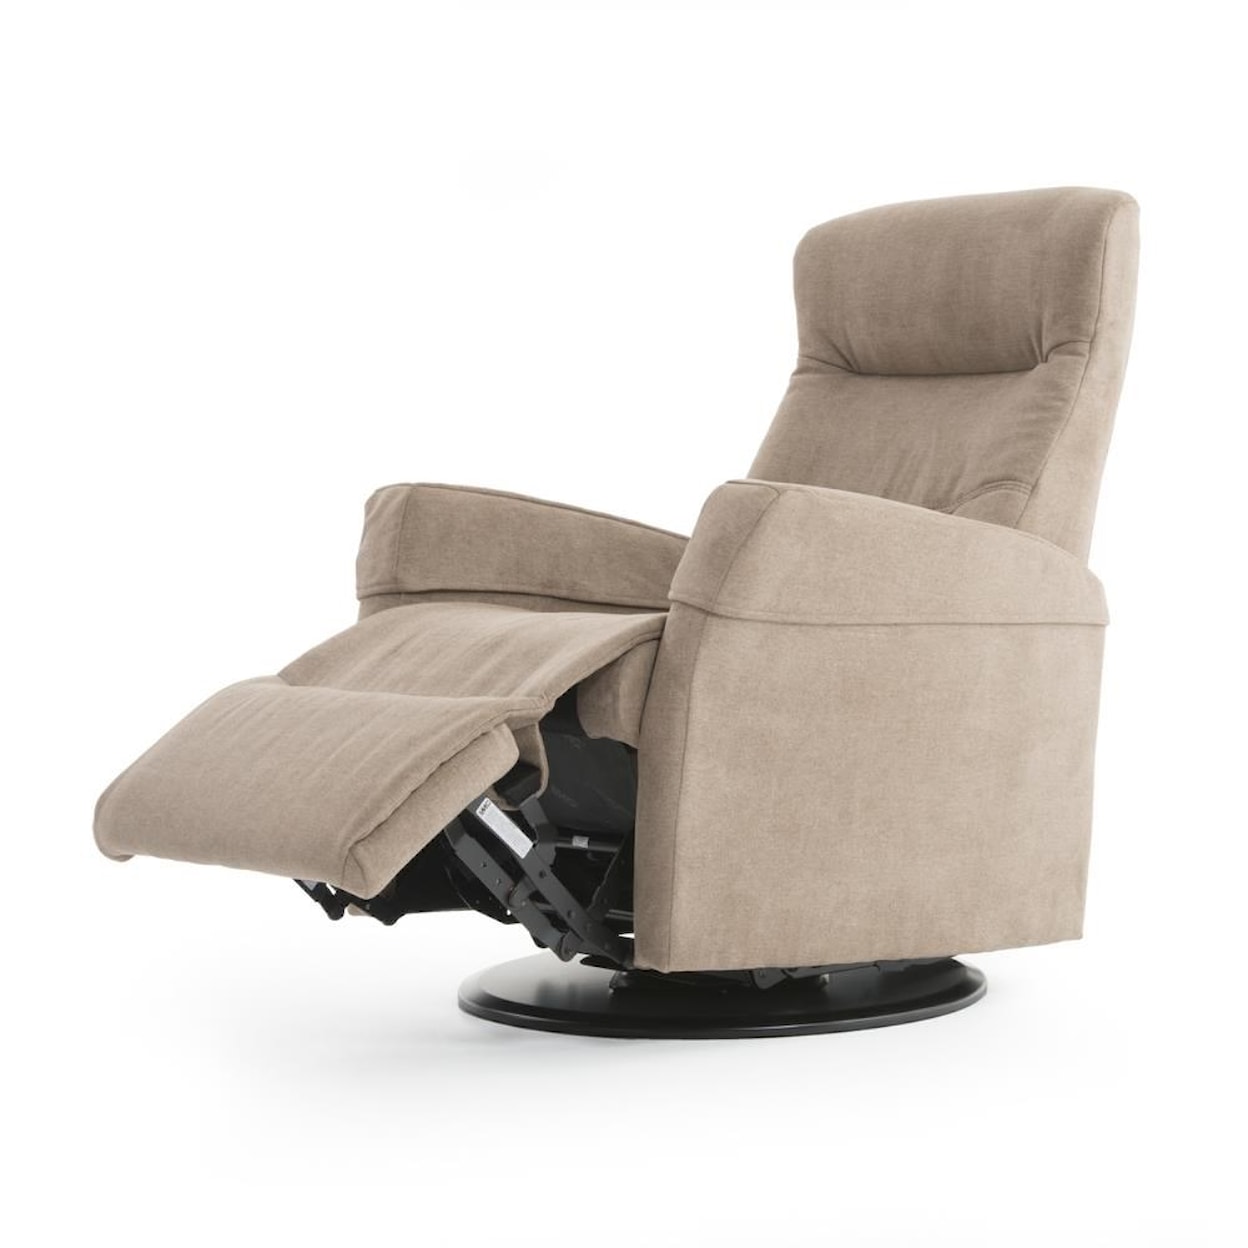 IMG Norway Lord Glider Recliner with Molded Foam